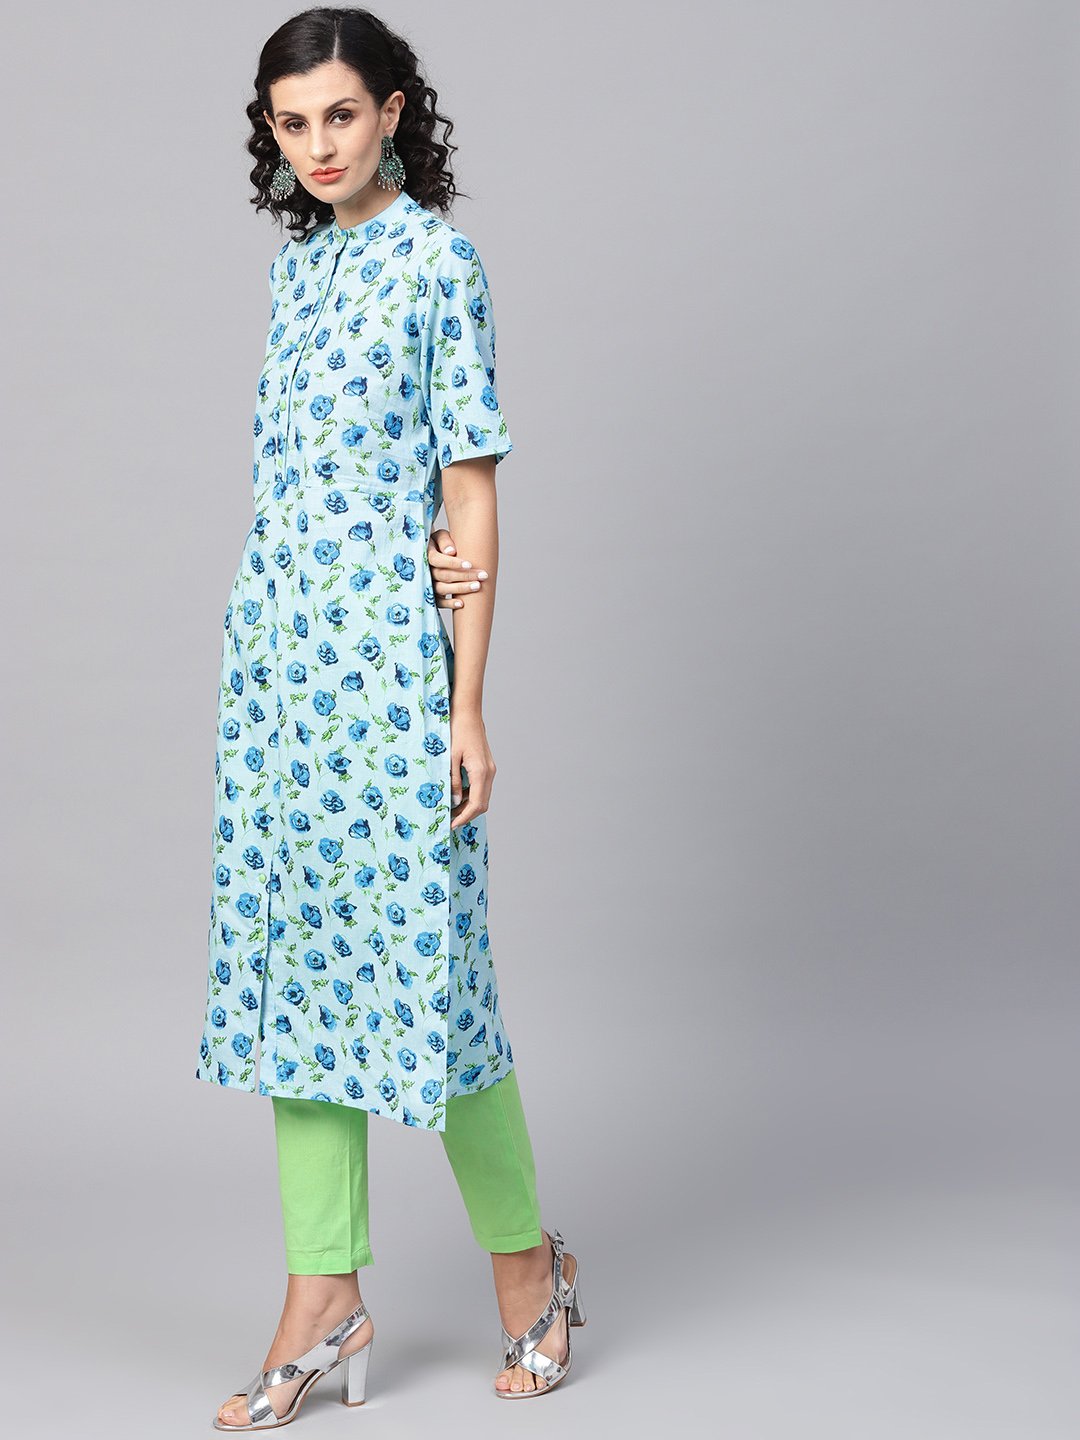 Women's Cotton Light Blue Floral Printed Kurta Set With Solid Light Green Pants - Nayo Clothing